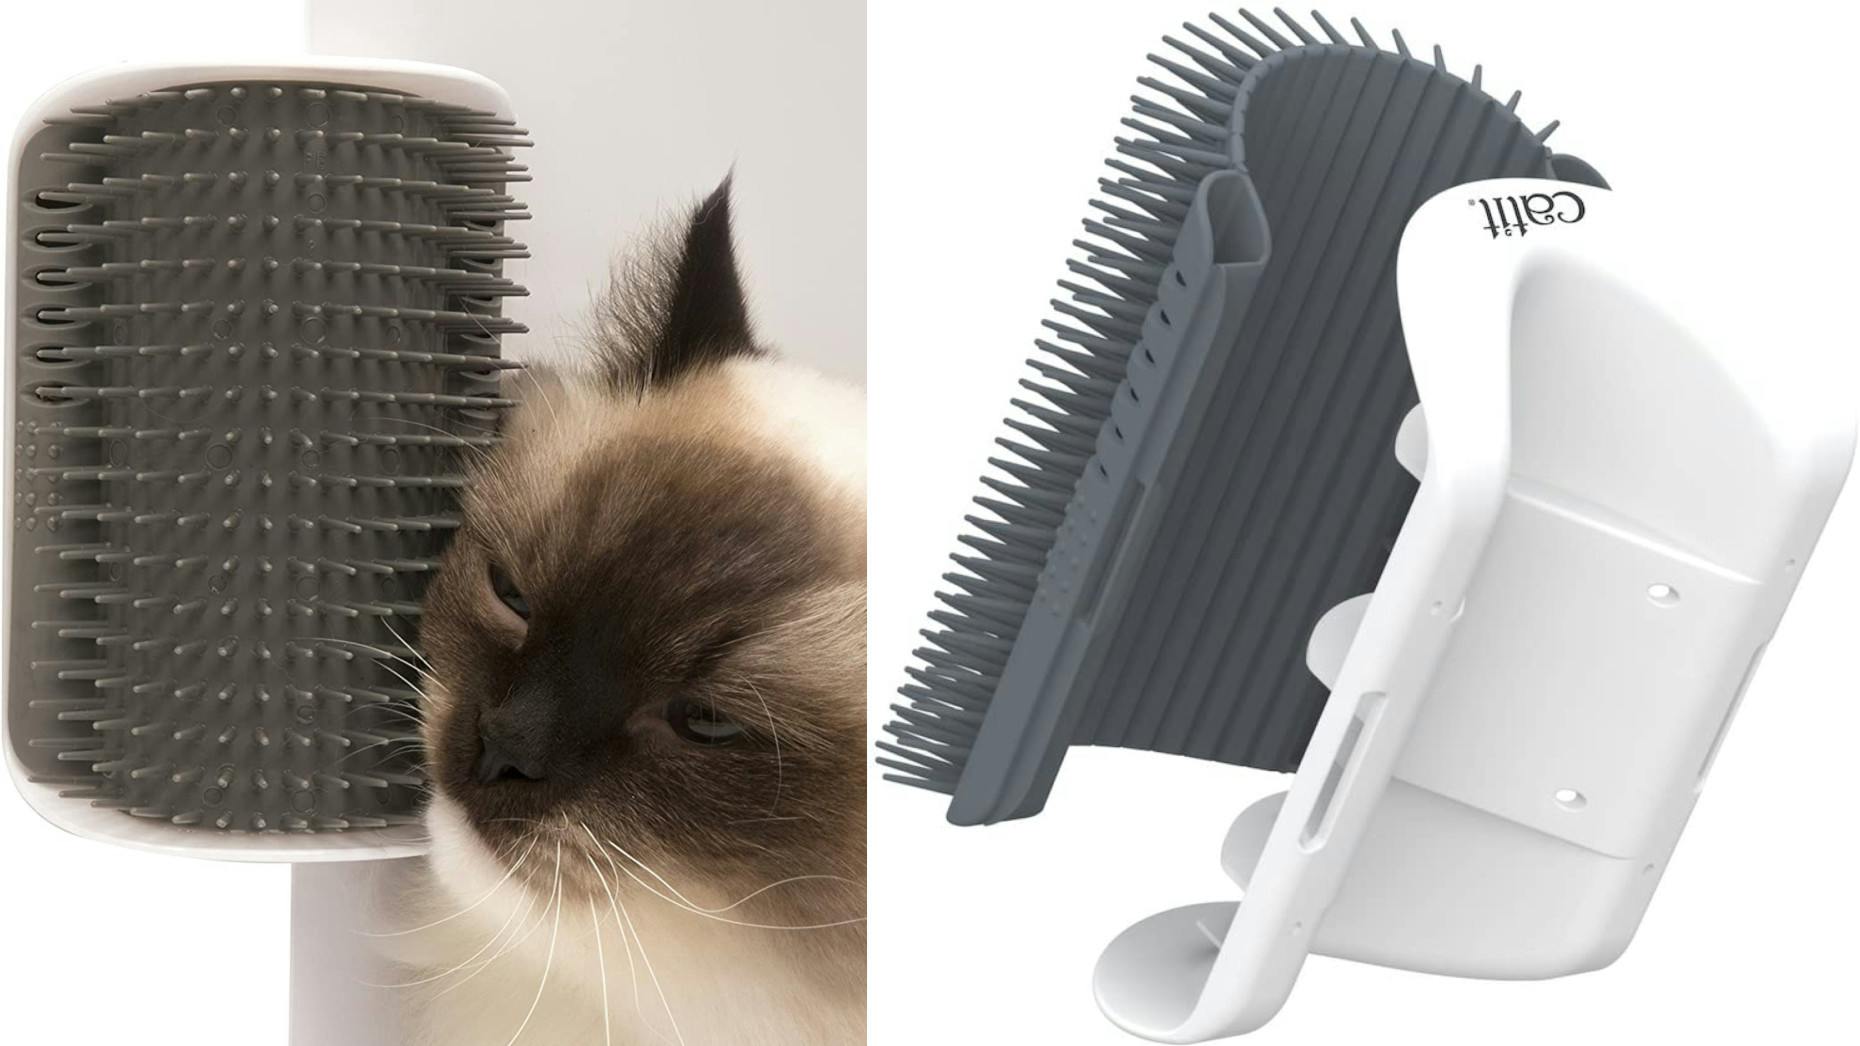 wall-mounted self-grooming brush for cats